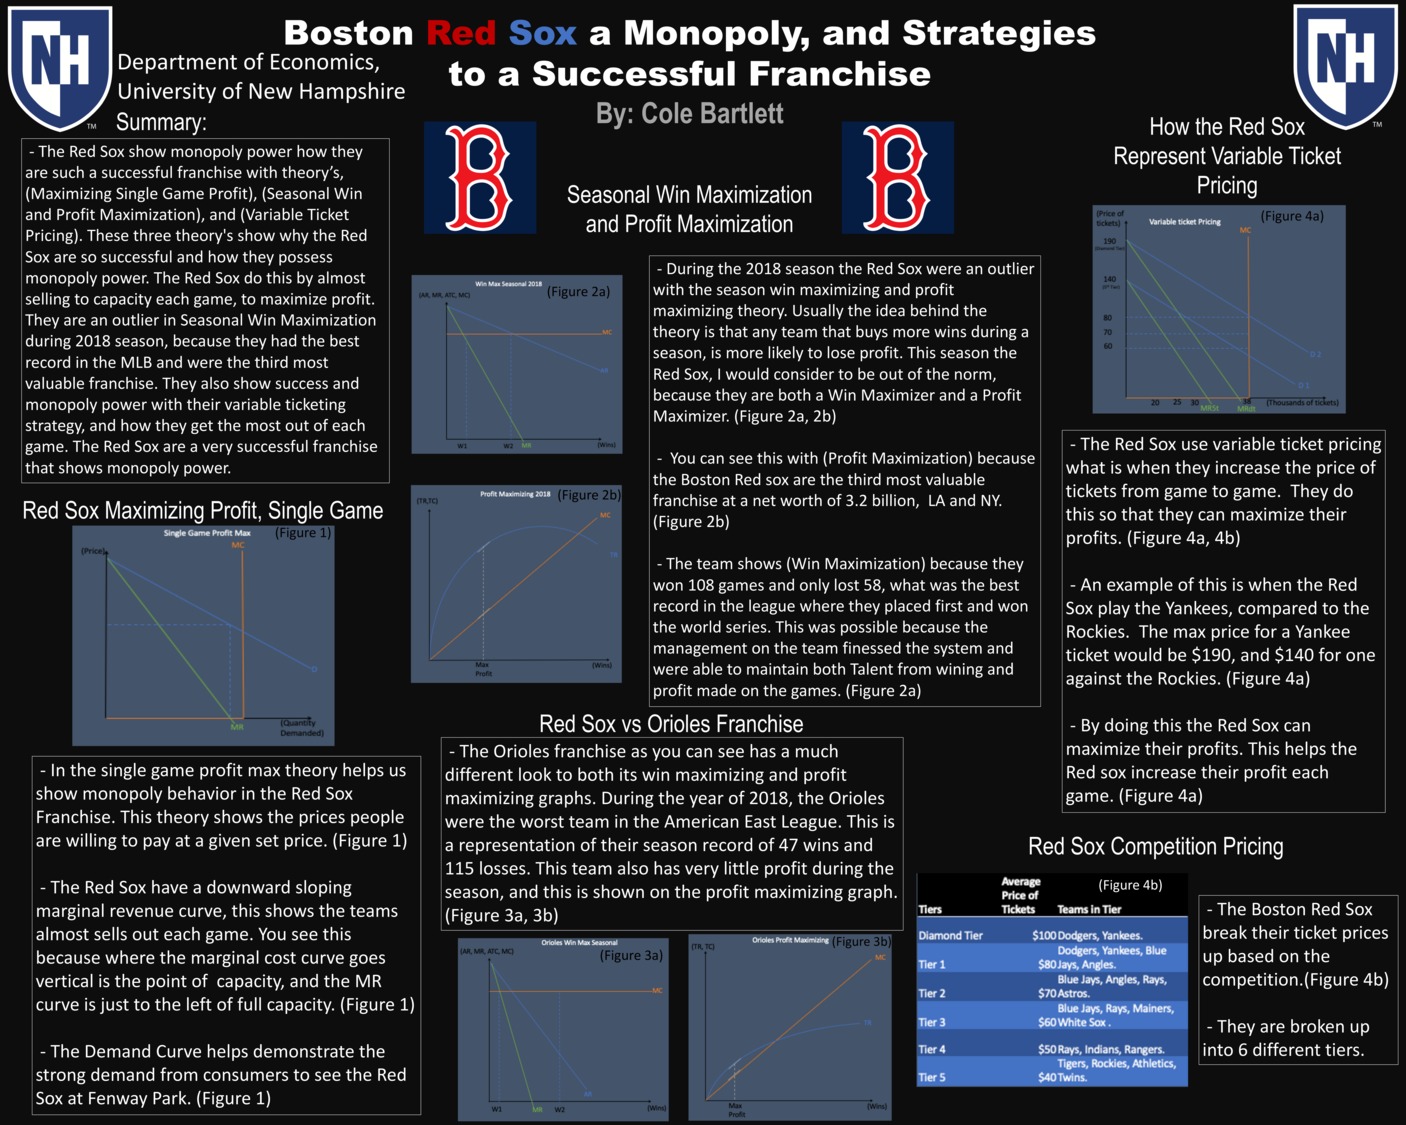 Boston Red Sox A Monopoly, And Strategies To A Successful Franchise  by csb1020